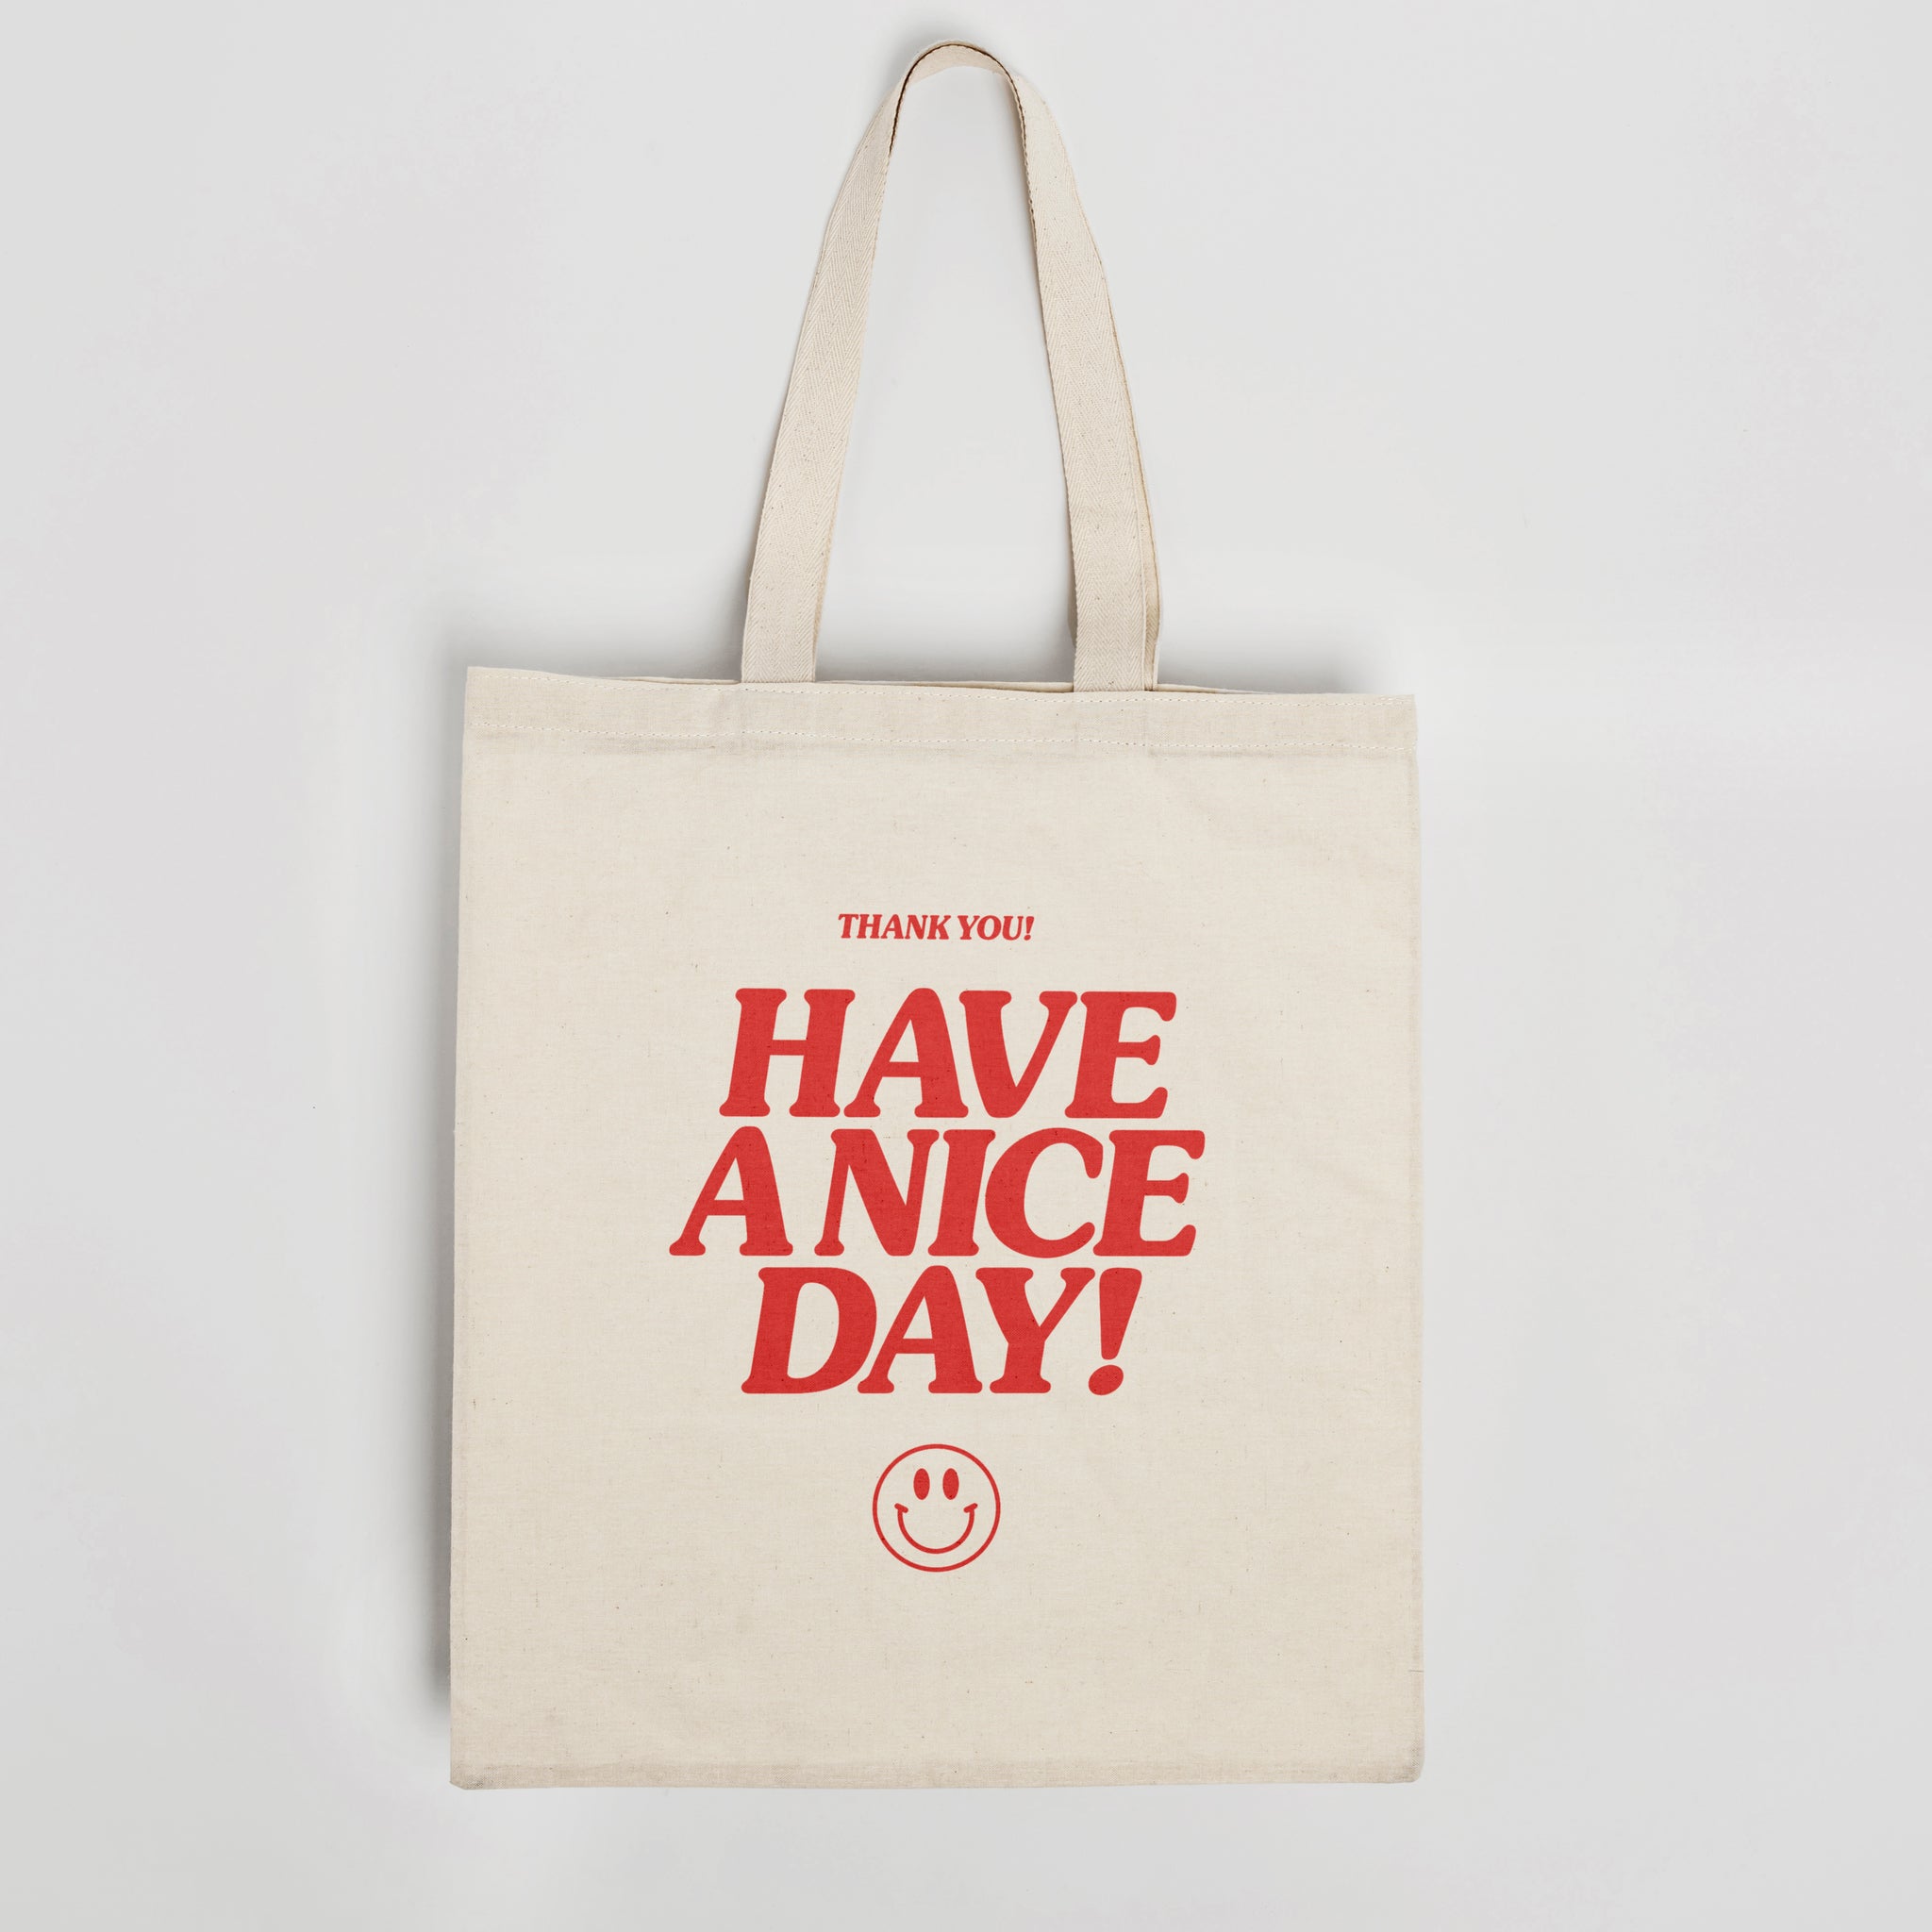 'Have A Nice Day' organic cotton canvas tote bag